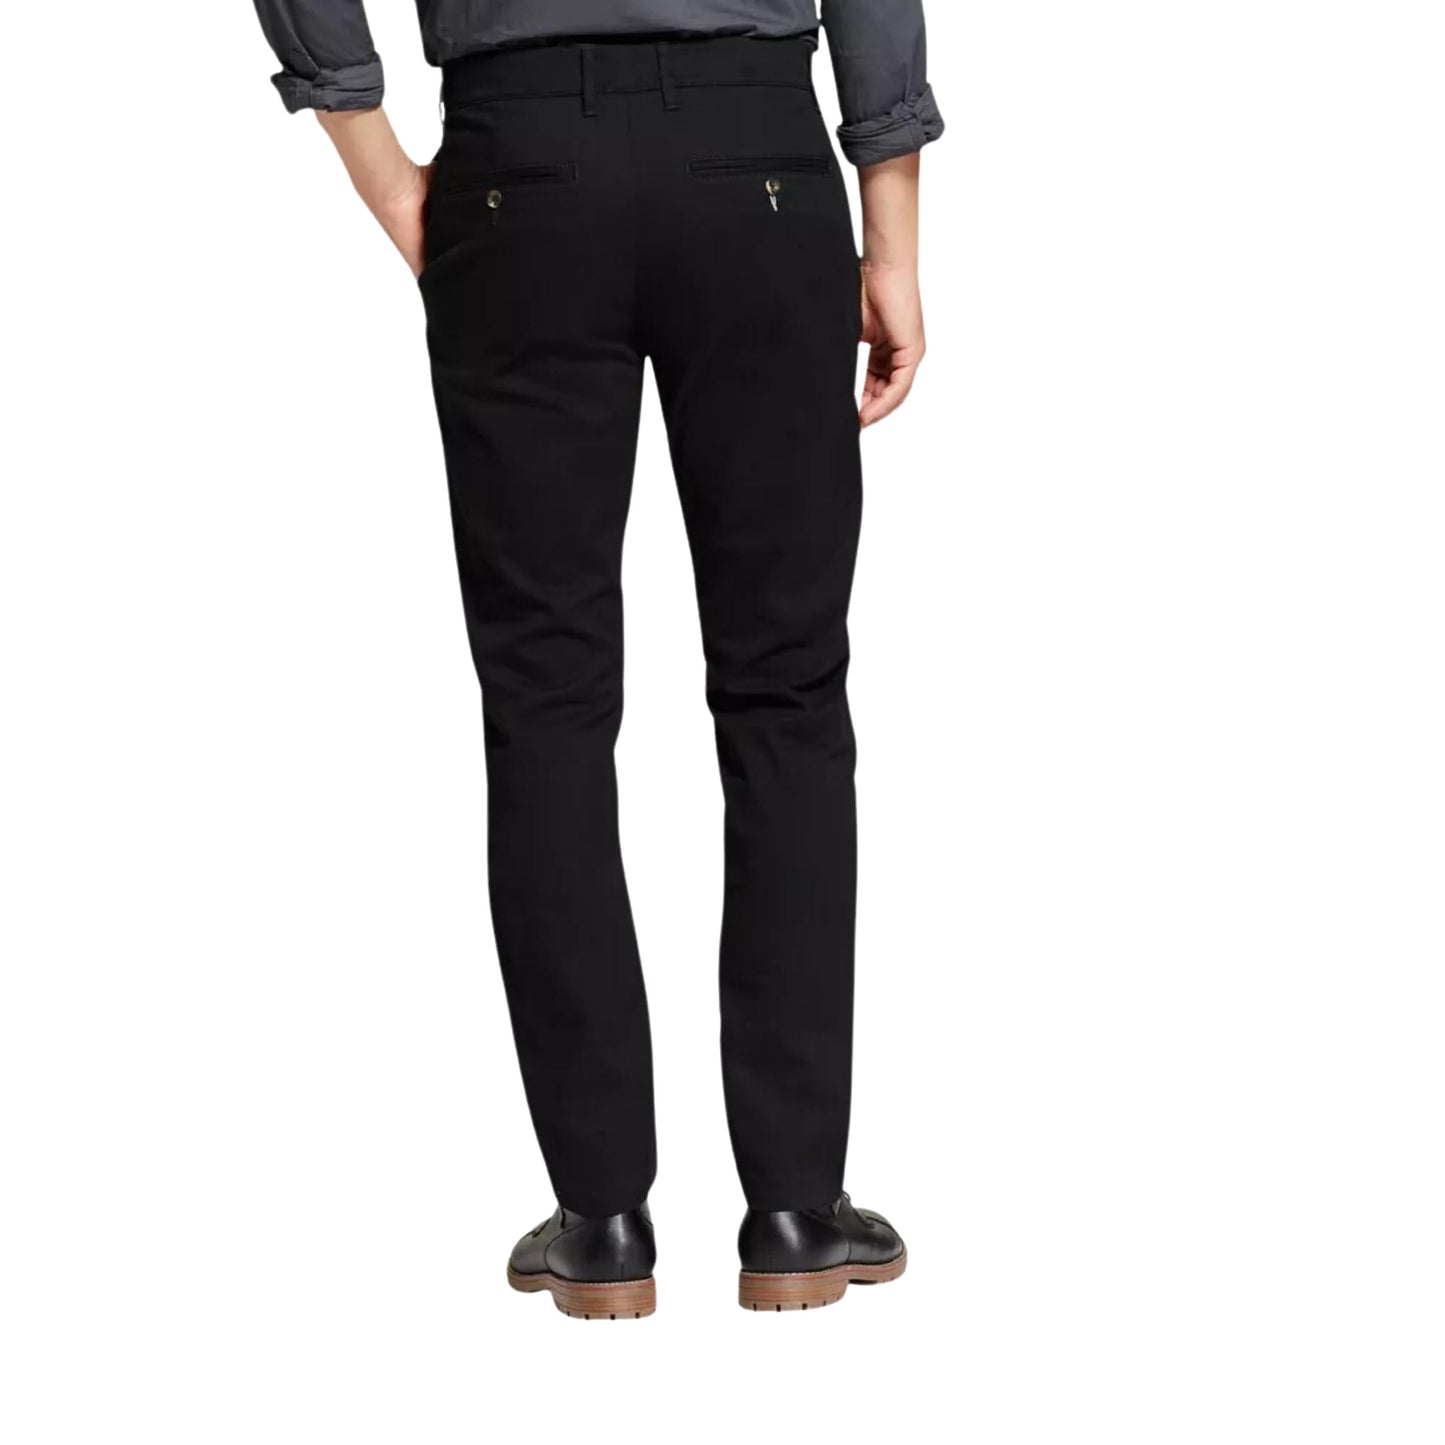 GOODFELLOW & CO Mens Bottoms GOODFELLOW & CO - Slim Fit Hennepin Chino